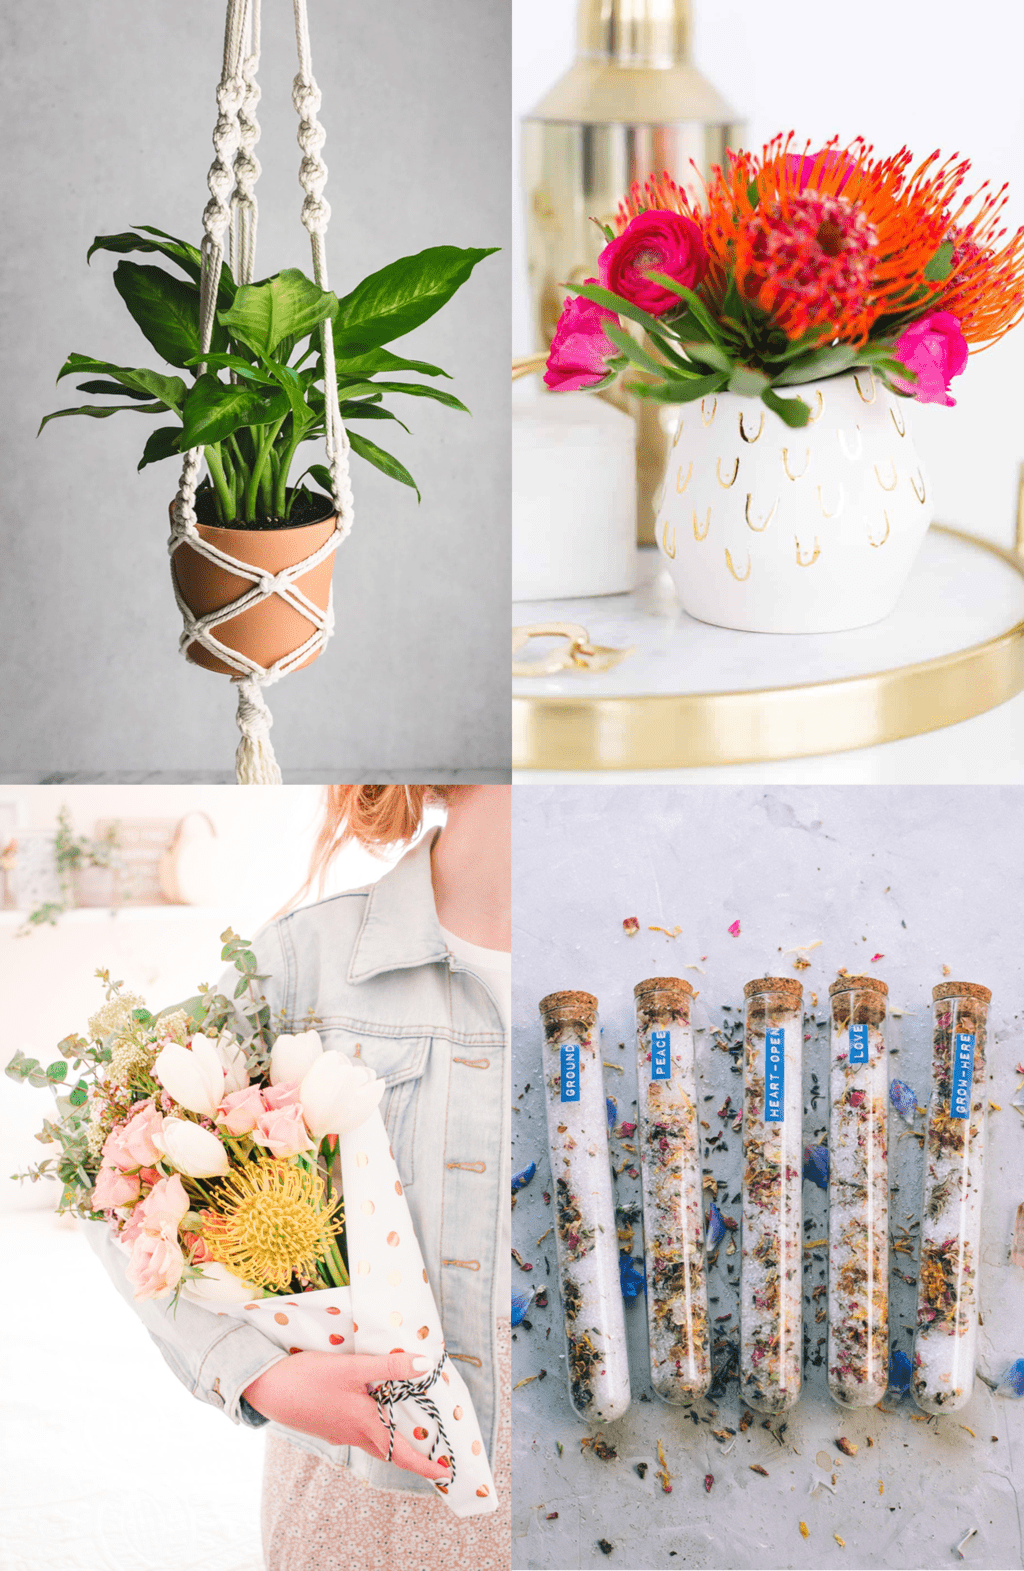 21 Mother's Day Homemade Gift Ideas — Sugar & Cloth